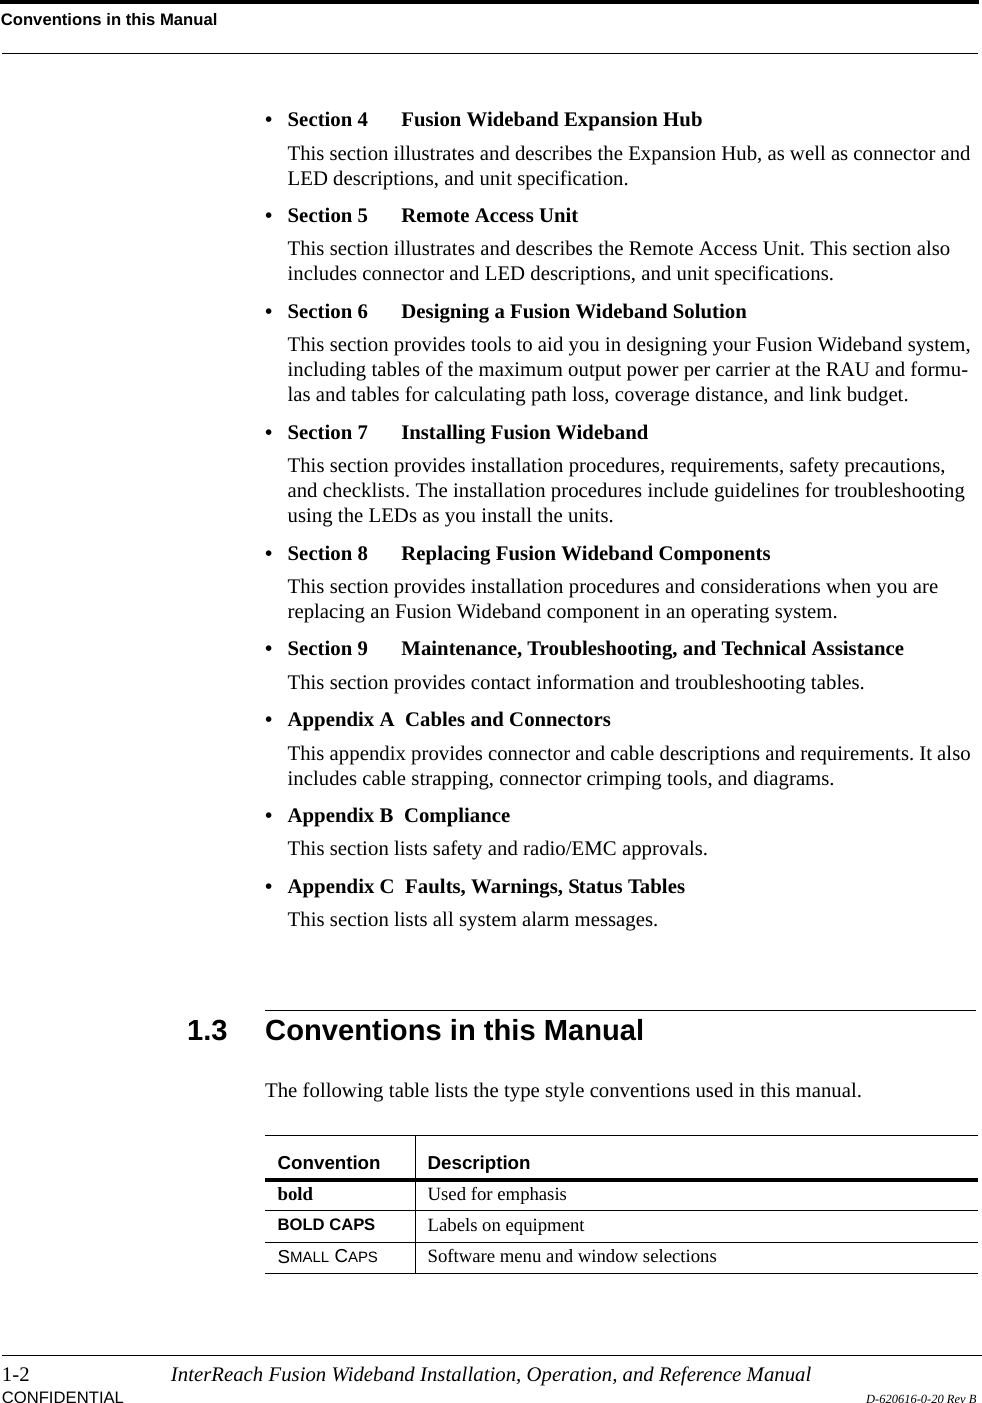 Conventions in this Manual1-2 InterReach Fusion Wideband Installation, Operation, and Reference ManualCONFIDENTIAL D-620616-0-20 Rev B• Section 4   Fusion Wideband Expansion HubThis section illustrates and describes the Expansion Hub, as well as connector and LED descriptions, and unit specification.• Section 5   Remote Access UnitThis section illustrates and describes the Remote Access Unit. This section also includes connector and LED descriptions, and unit specifications.• Section 6   Designing a Fusion Wideband SolutionThis section provides tools to aid you in designing your Fusion Wideband system, including tables of the maximum output power per carrier at the RAU and formu-las and tables for calculating path loss, coverage distance, and link budget.• Section 7   Installing Fusion WidebandThis section provides installation procedures, requirements, safety precautions, and checklists. The installation procedures include guidelines for troubleshooting using the LEDs as you install the units.• Section 8   Replacing Fusion Wideband ComponentsThis section provides installation procedures and considerations when you are replacing an Fusion Wideband component in an operating system.• Section 9  Maintenance, Troubleshooting, and Technical AssistanceThis section provides contact information and troubleshooting tables.• Appendix A  Cables and ConnectorsThis appendix provides connector and cable descriptions and requirements. It also includes cable strapping, connector crimping tools, and diagrams.• Appendix B  ComplianceThis section lists safety and radio/EMC approvals.• Appendix C  Faults, Warnings, Status TablesThis section lists all system alarm messages.1.3 Conventions in this ManualThe following table lists the type style conventions used in this manual.Convention Descriptionbold Used for emphasisBOLD CAPS Labels on equipmentSMALL CAPS Software menu and window selections